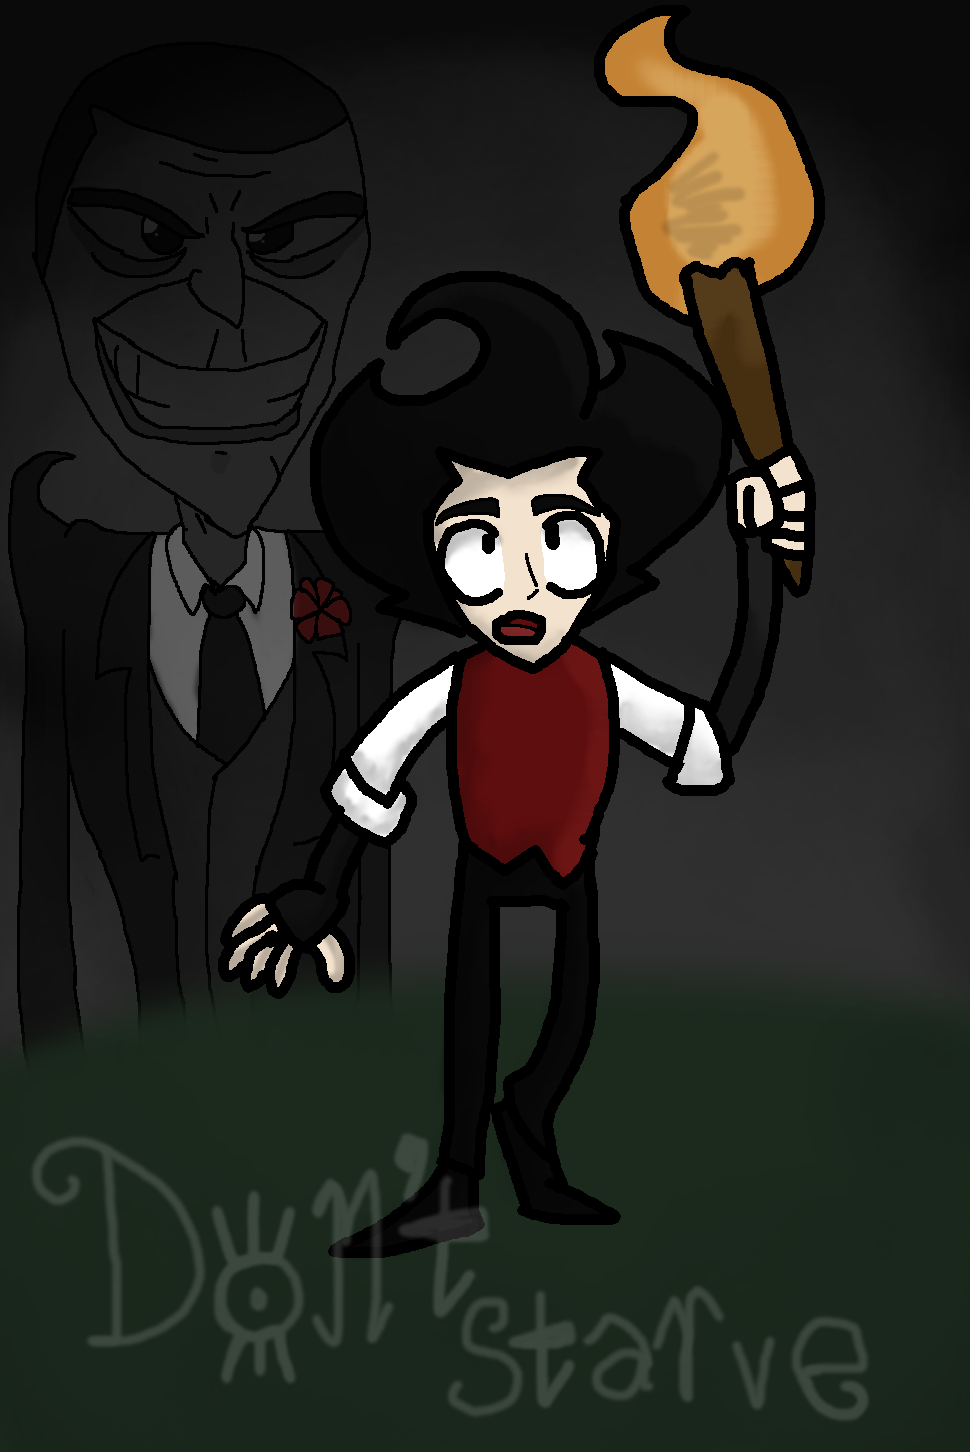 don_t_starve_by_tooncooro-d7b2mov.png